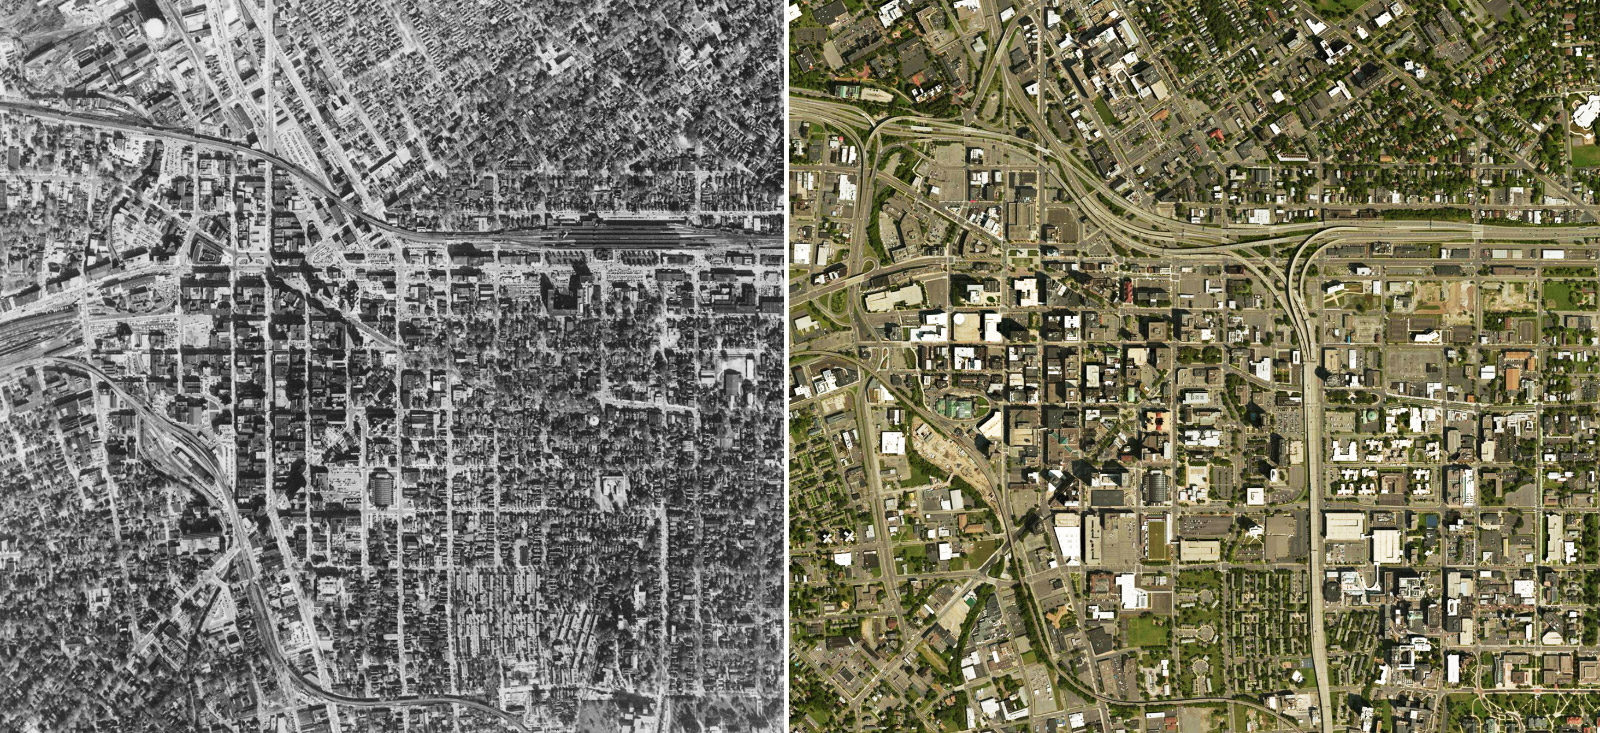 The I-81 viaduct cuts through Syracuse’s urban core. Left: The city's density in 1955 before the highway's construction. Right: The city's density today.